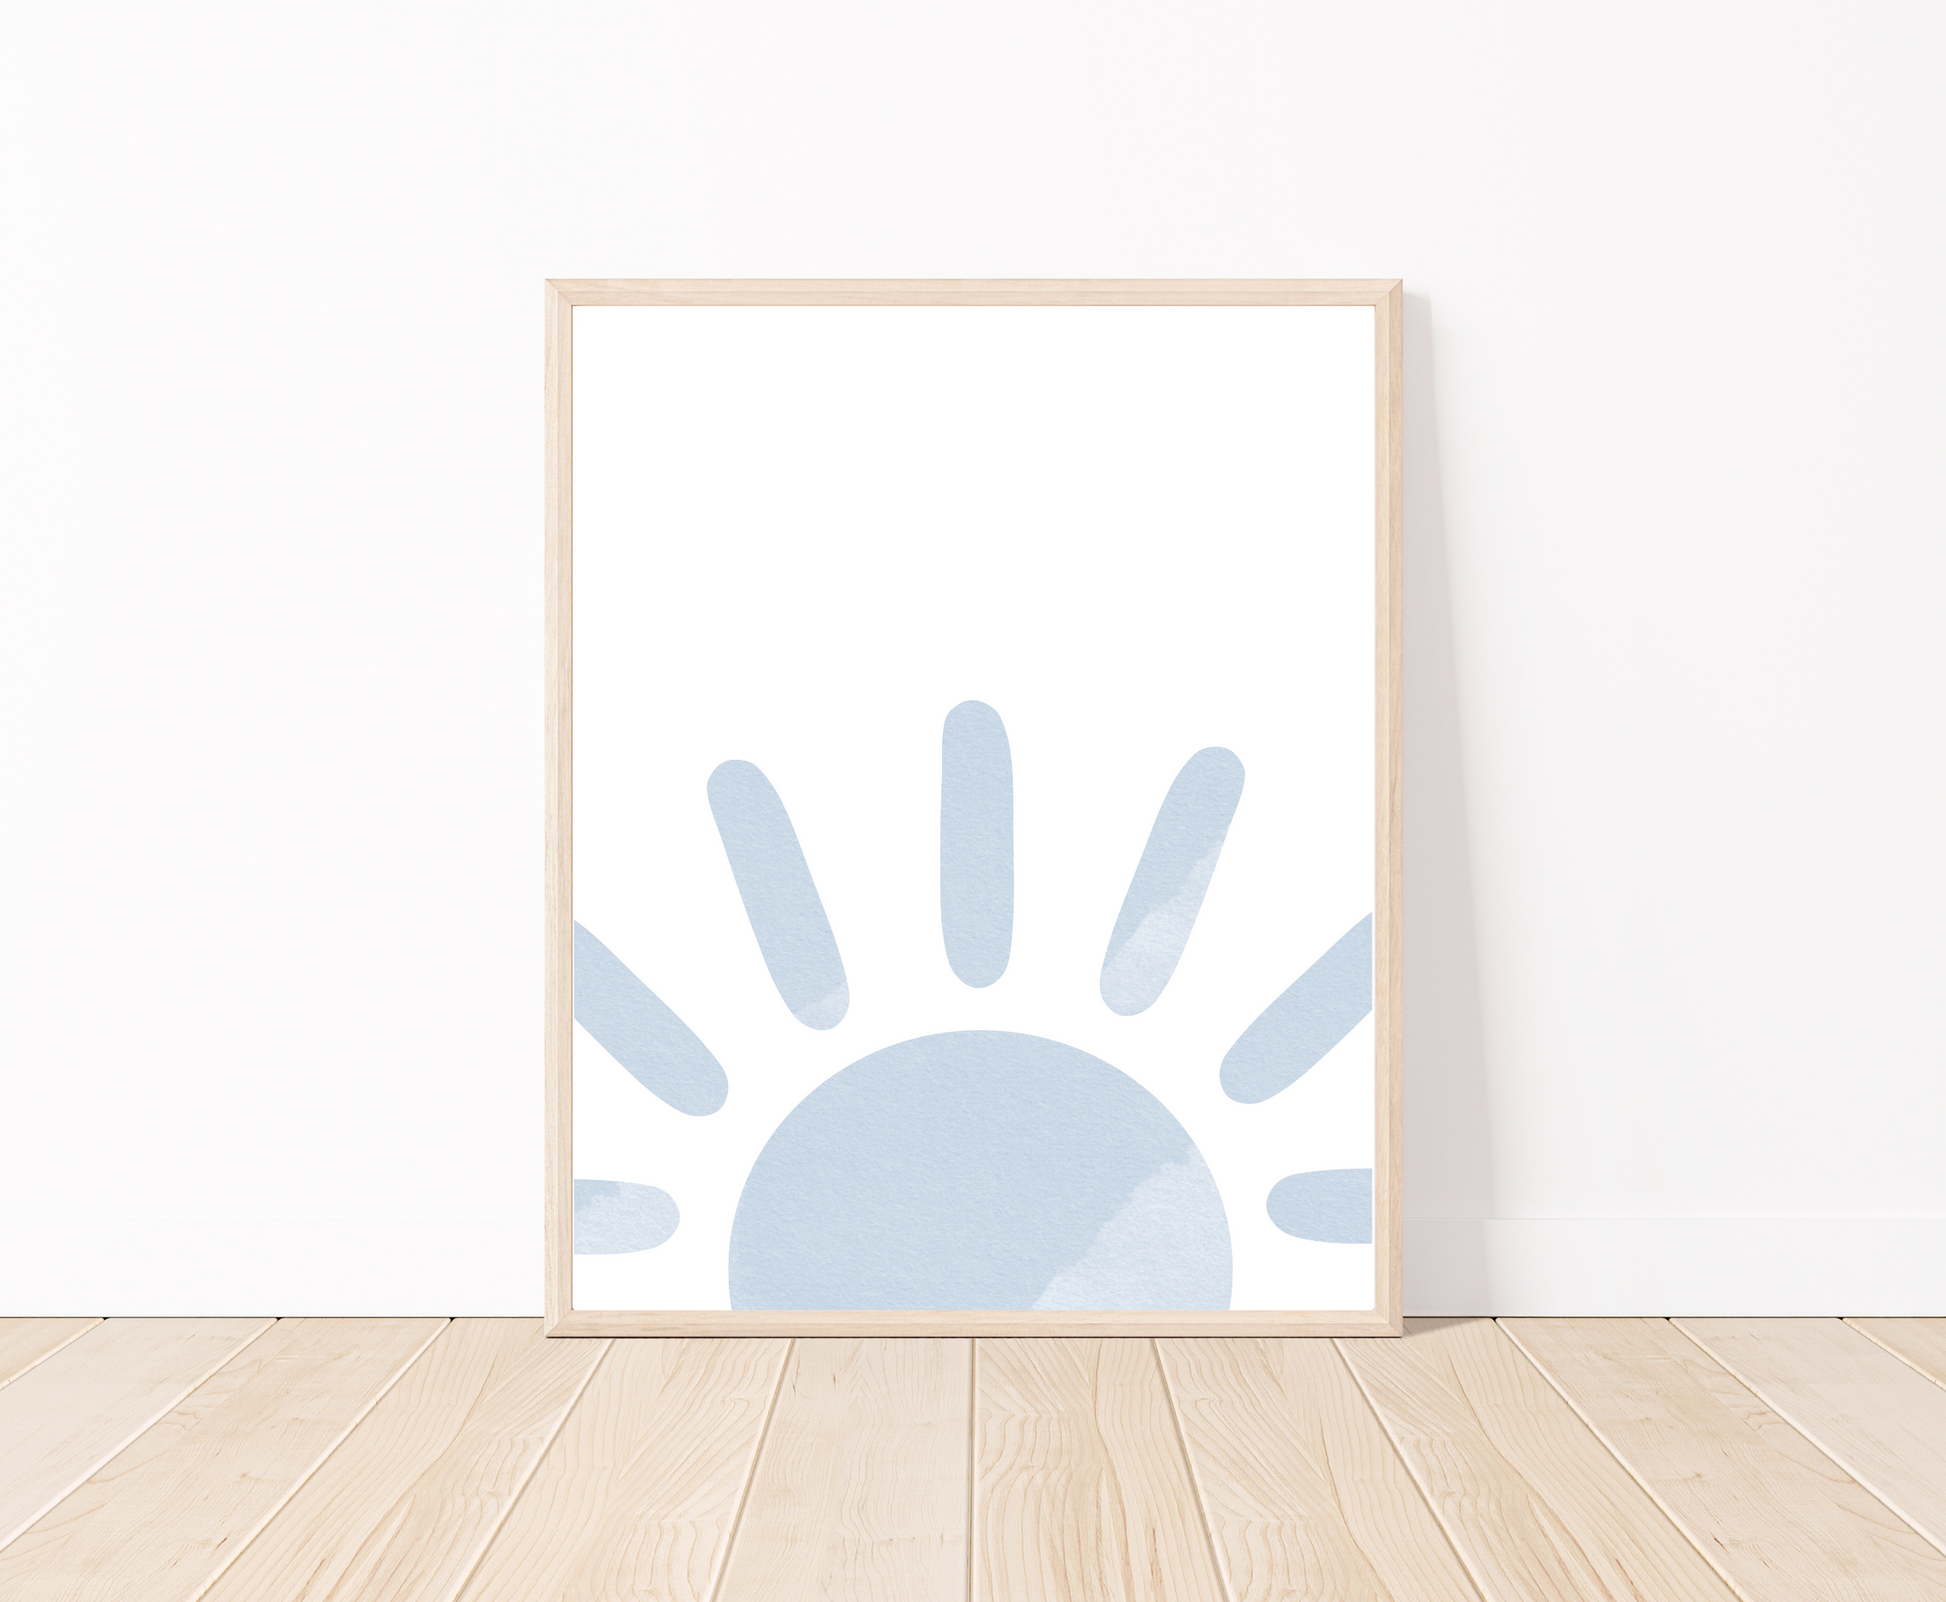 A digital poster is placed on a white wall and parquet flooring and shows a baby blue sun at the base of the frame.